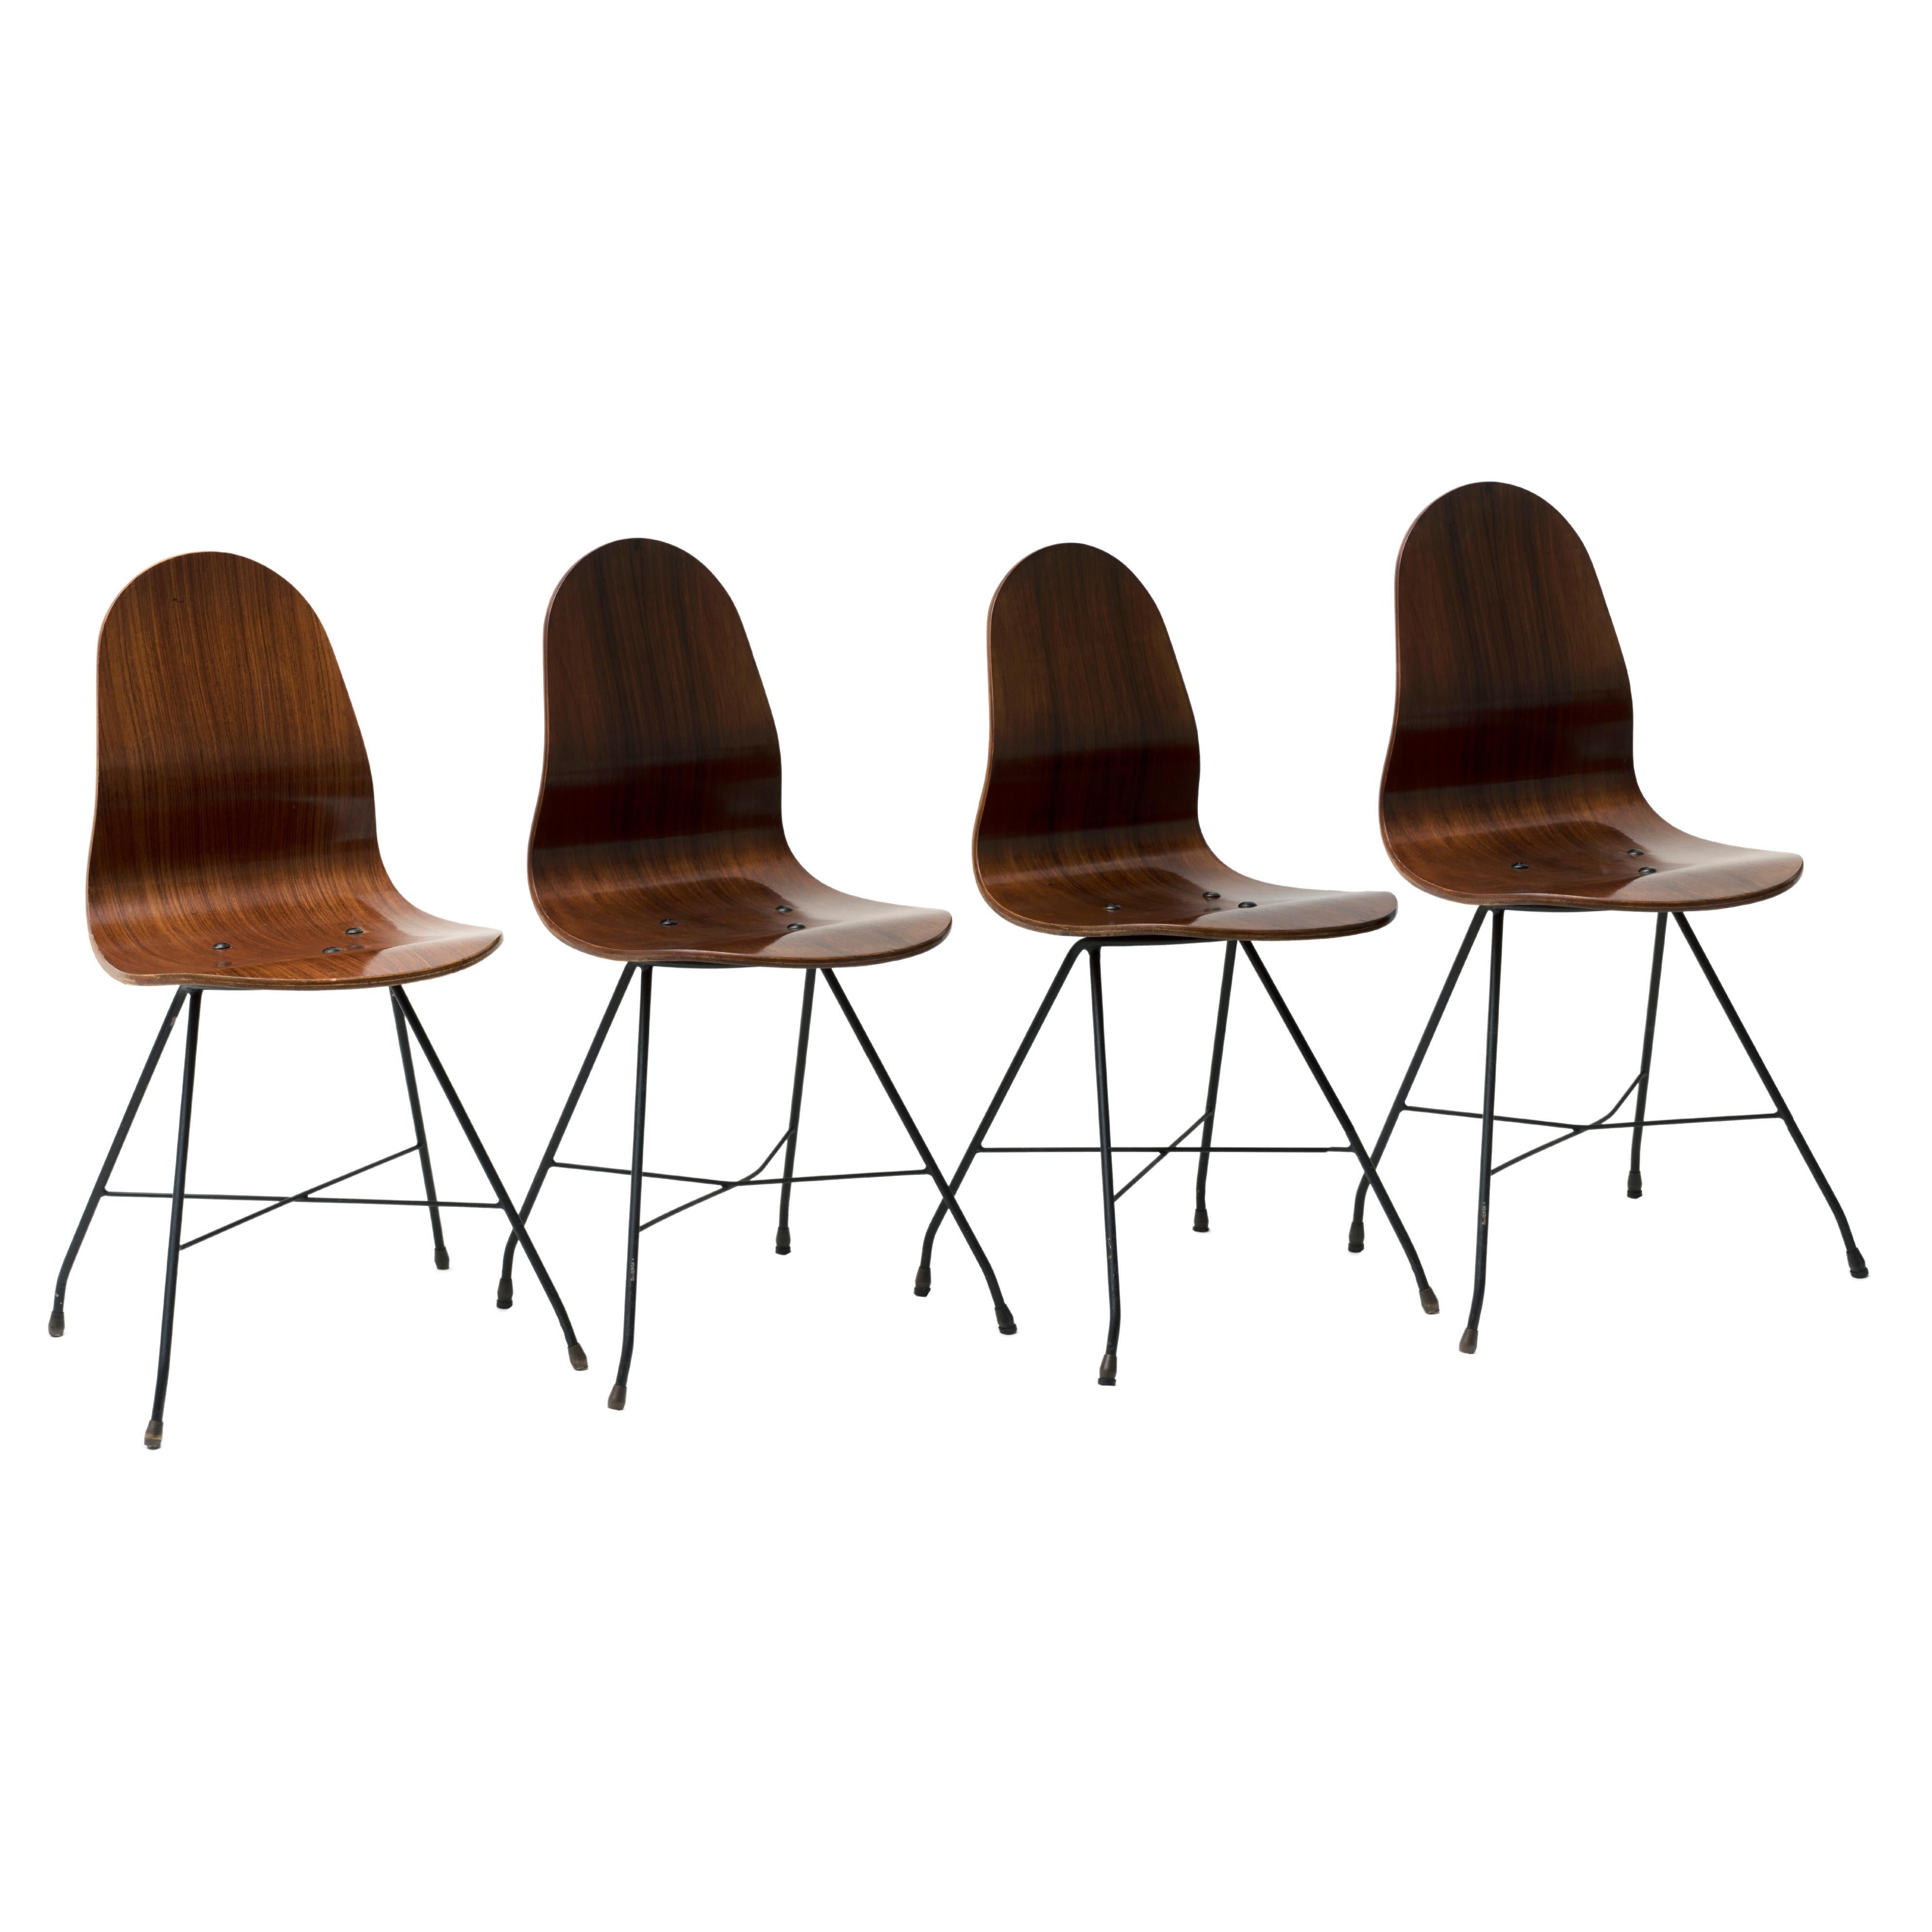 Four Vintage Wooden Chairs by Franco Campo and Carlo Graffi, 1950s